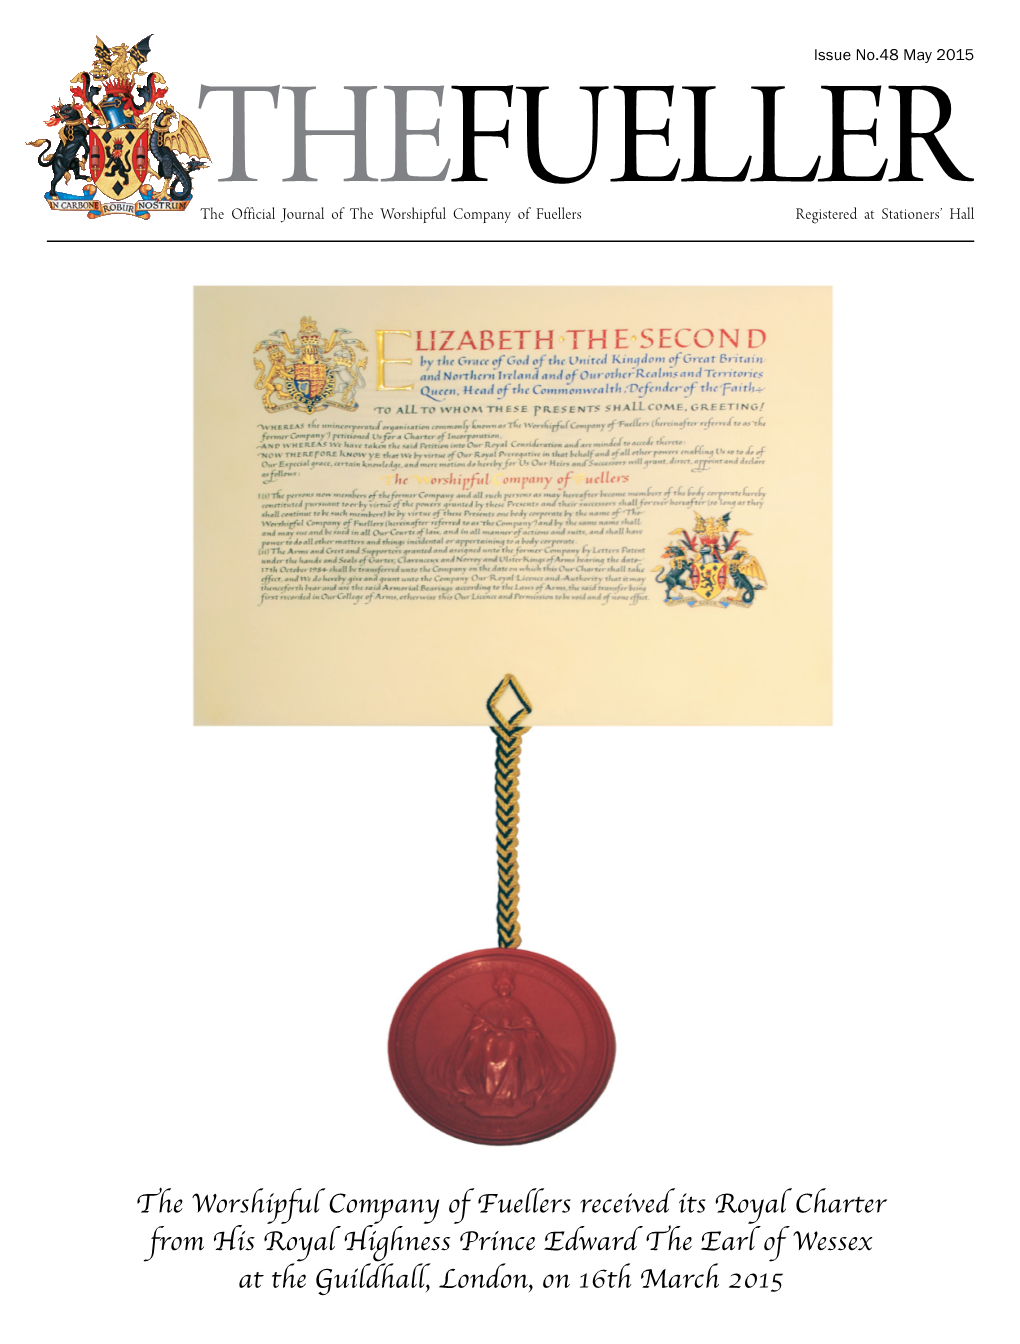 The Worshipful Company of Fuellers Received Its Royal Charter from His